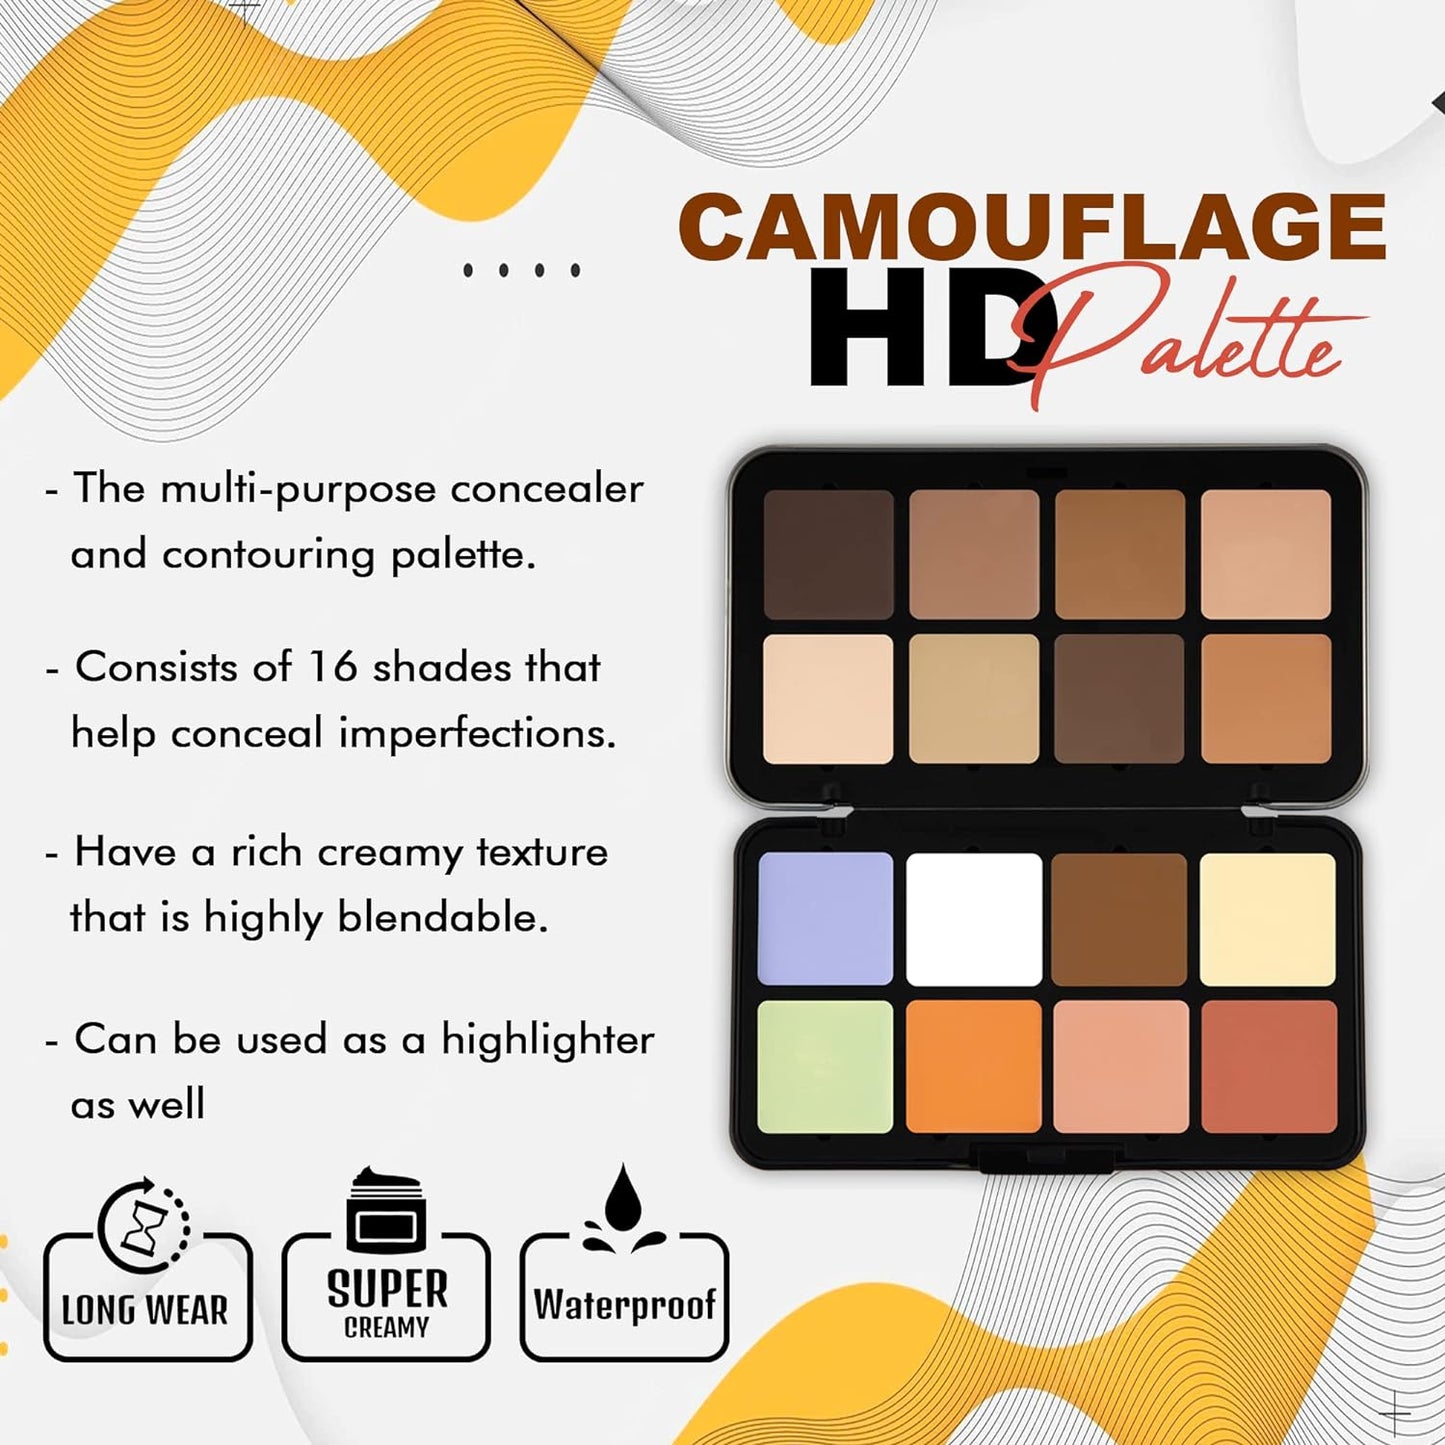 Daily Life Forever52 16 Color Camouflage HD Palette - Light Weight Multi-Purpose Matte Concealer Color Corrector Palette - CHP001 concealer from Forever52